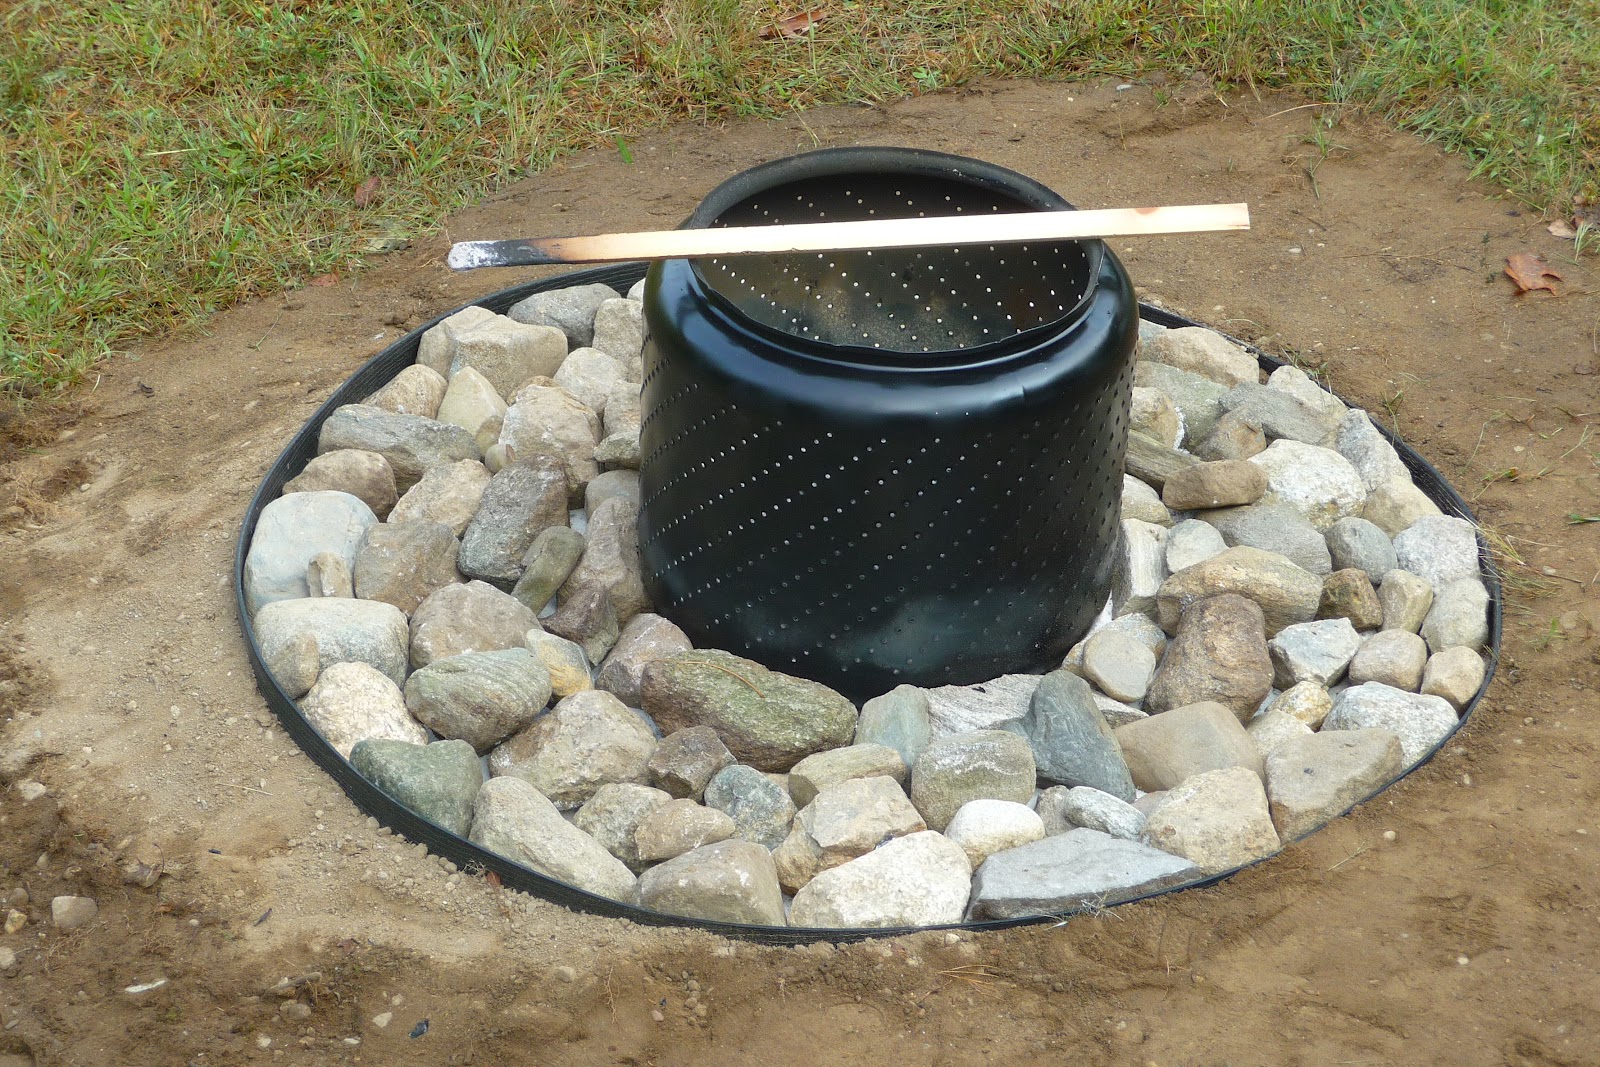 Diy Fire Pit For As Little 0, Dryer Drum Fire Pit